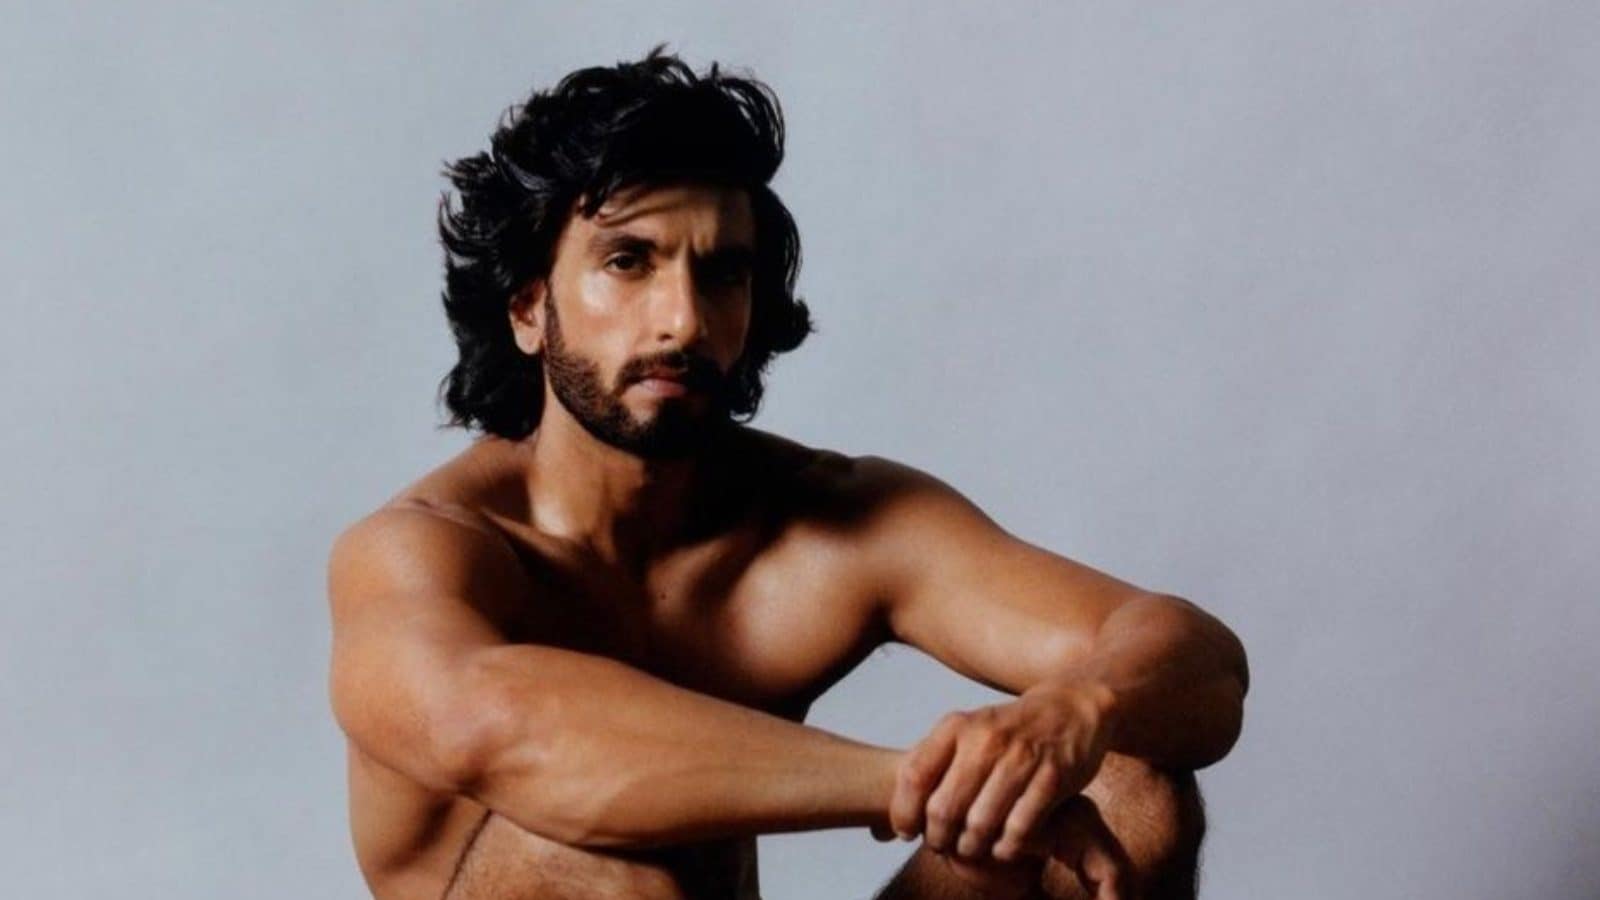 Ranveer Singhs troubles may increase due to nude photo shoot FIR registered in Mumbai